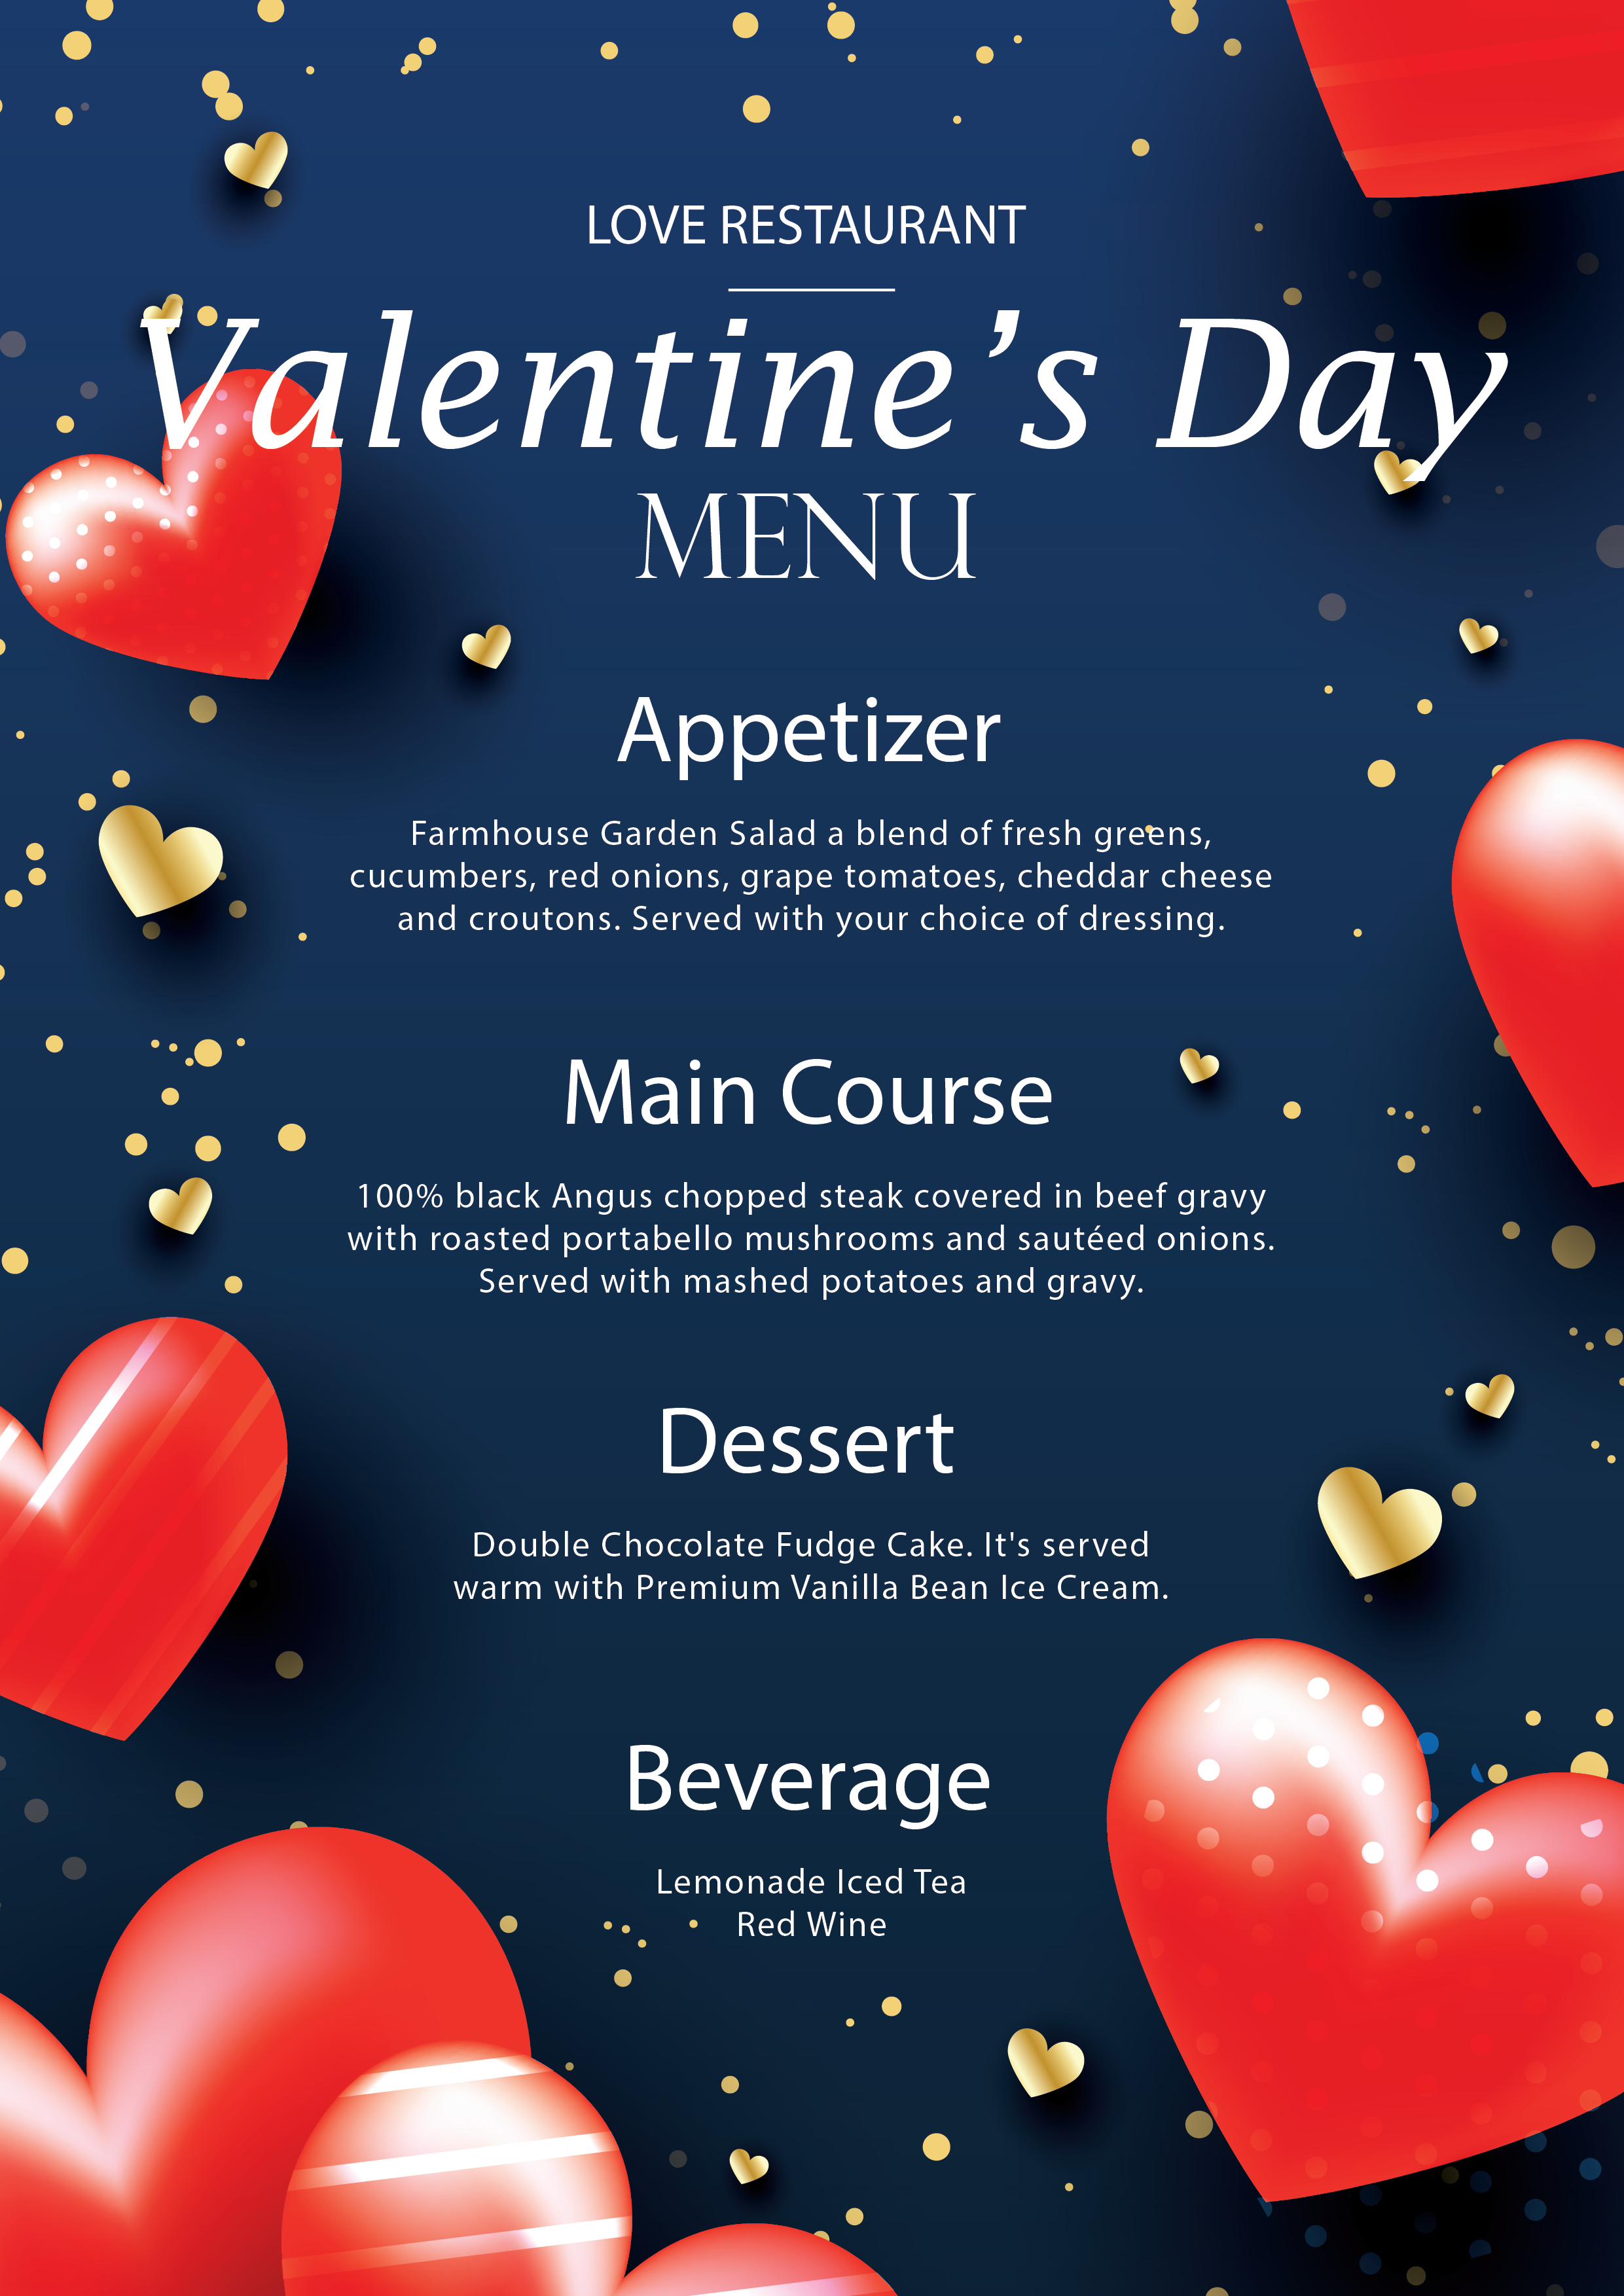 easy-to-customize-valentine-menu-template-download